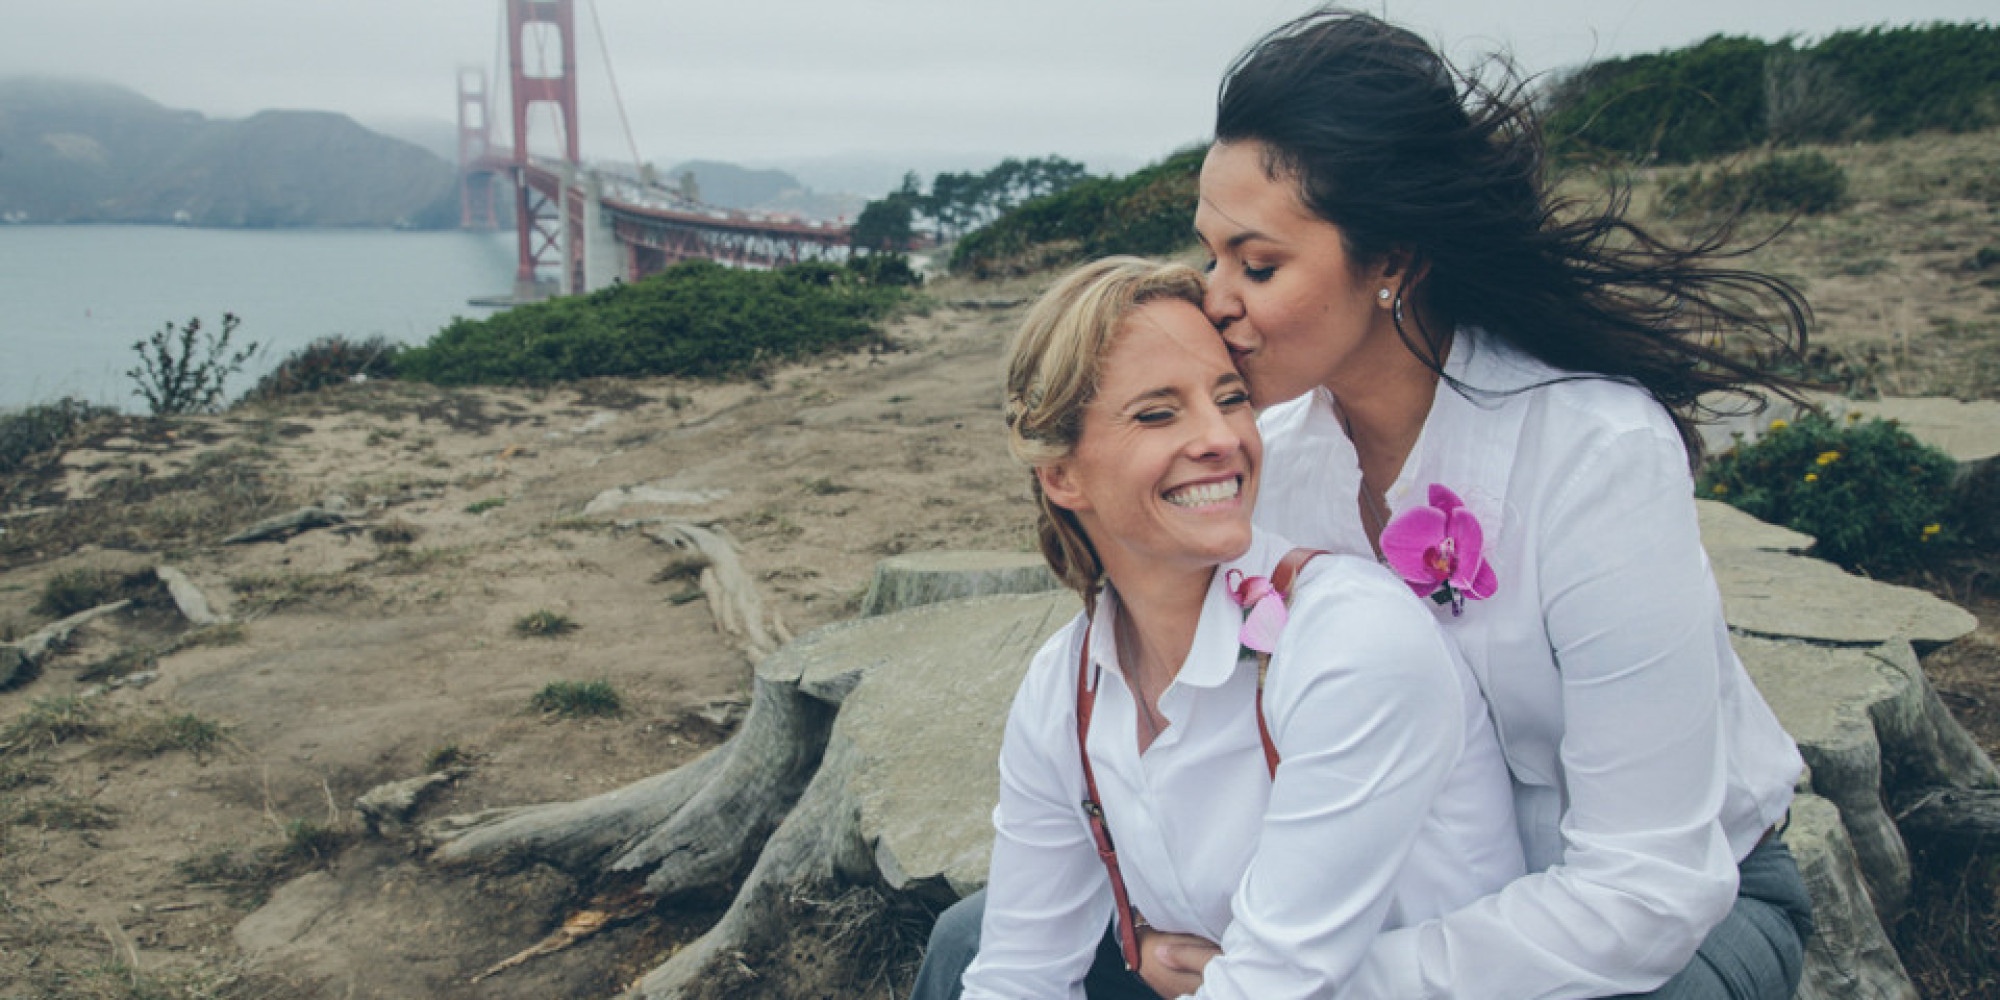 Steph Grant Talks About Life As A Photographer For Lgbt Weddings Huffpost